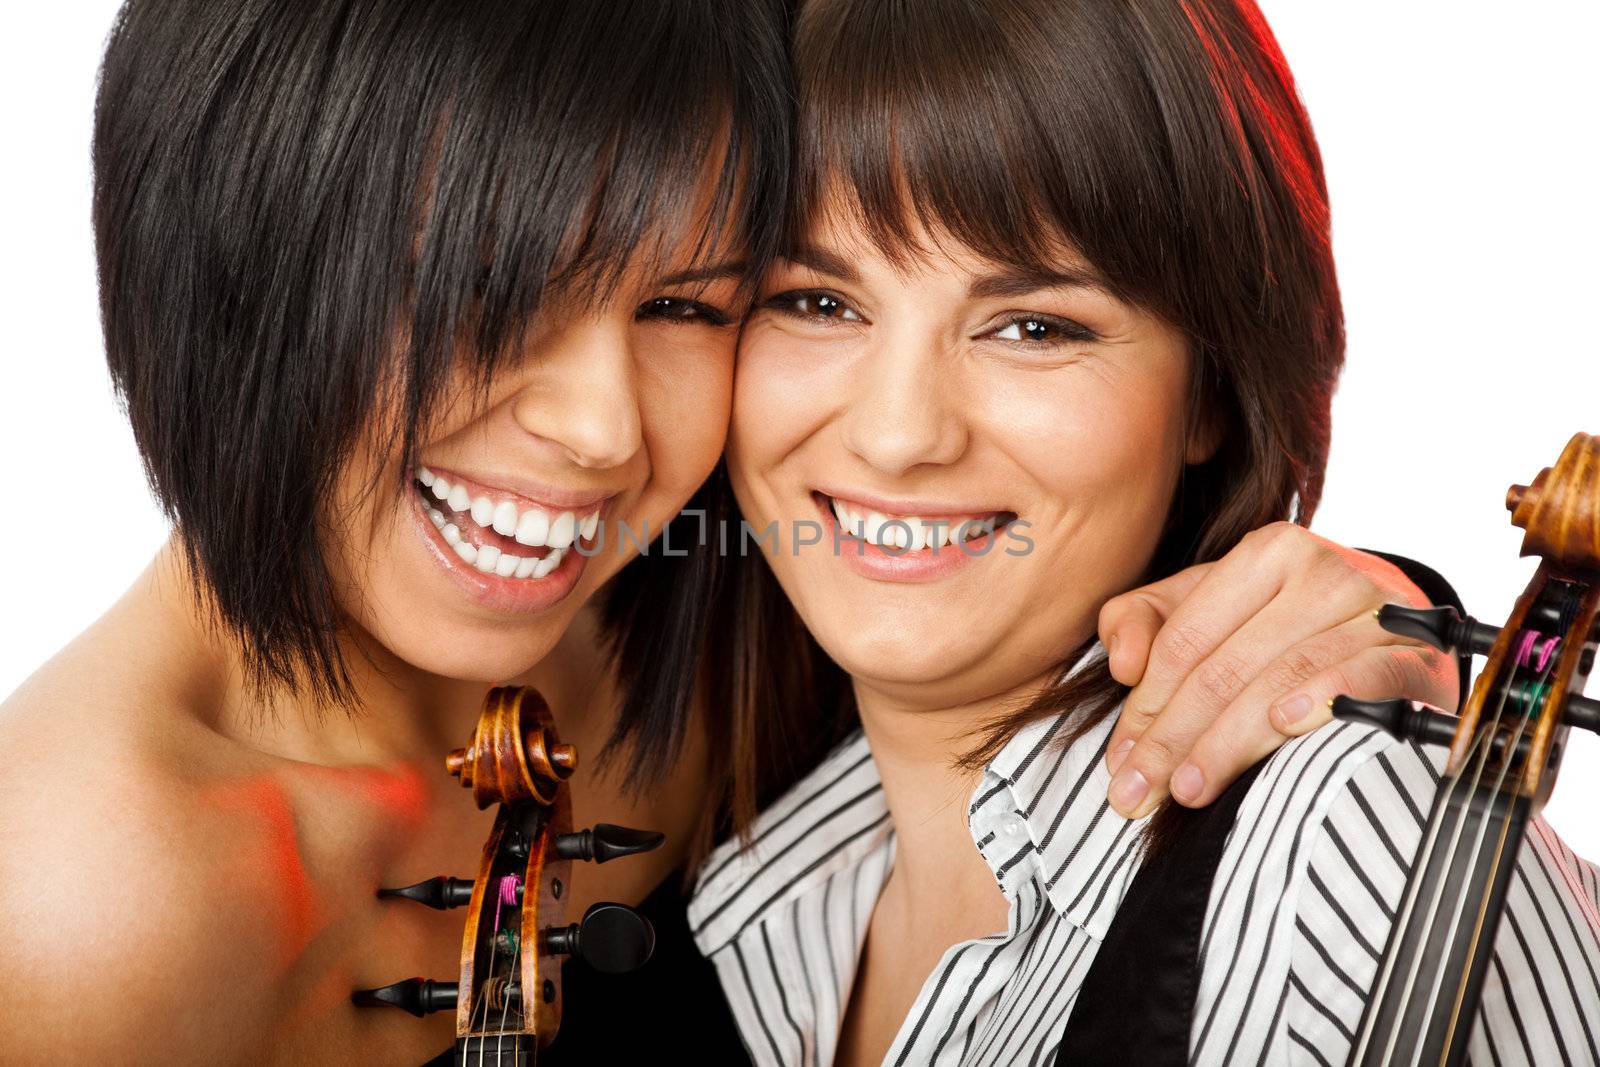 Two beautiful girls cheek-to-cheek smiling and hugging holding violins